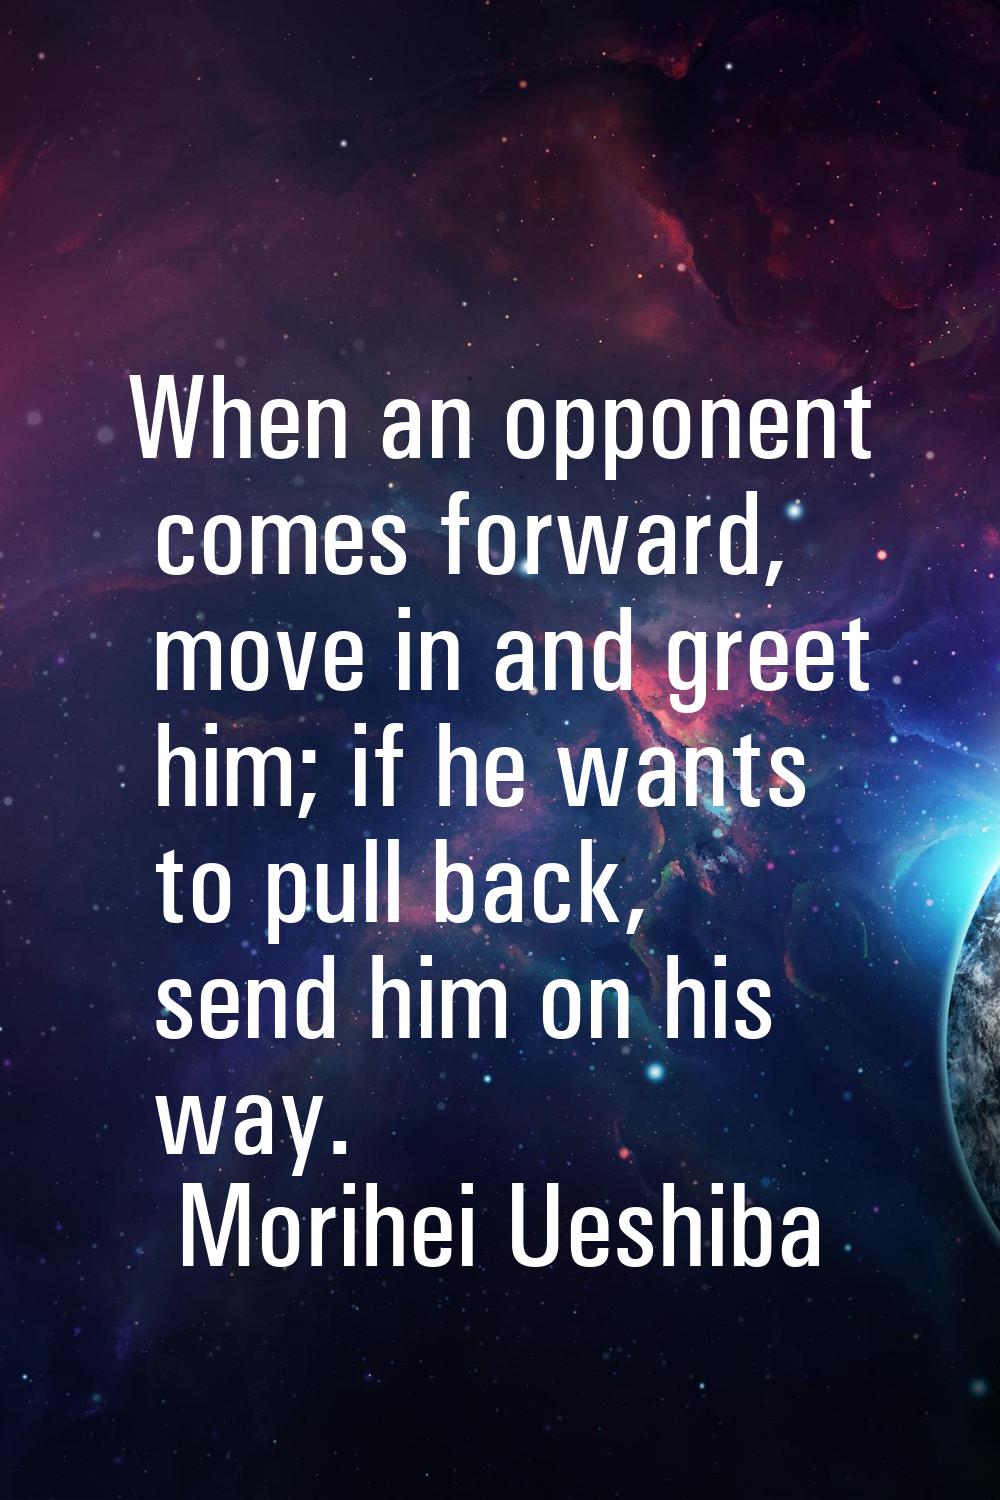 When an opponent comes forward, move in and greet him; if he wants to pull back, send him on his wa